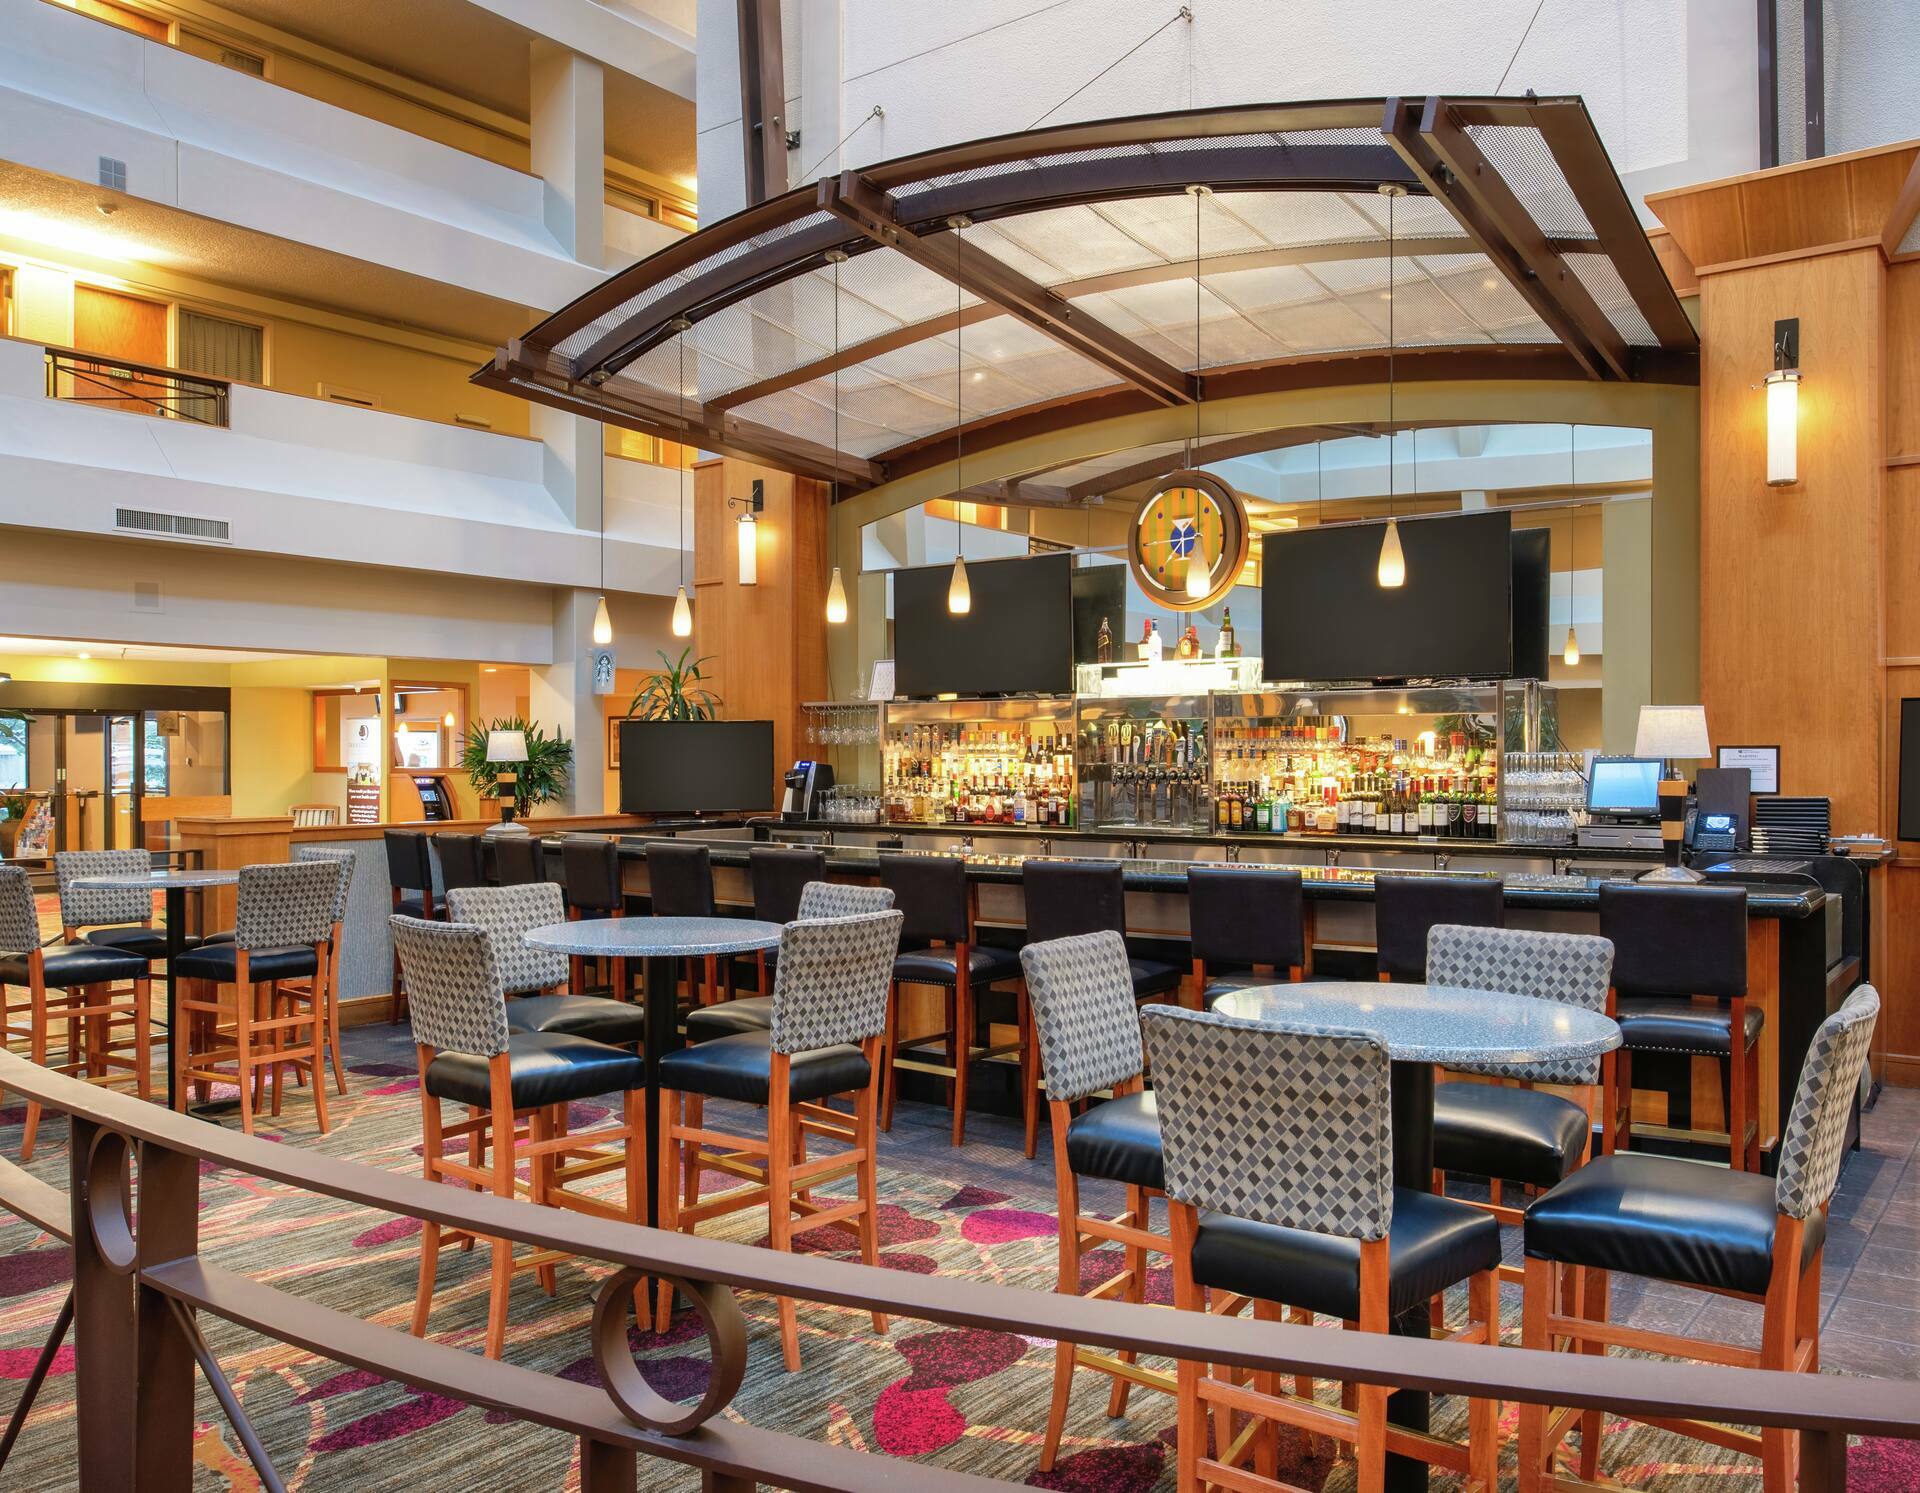 Photo of DoubleTree Suites by Hilton Hotel Seattle Airport - Southcenter, Seattle, WA